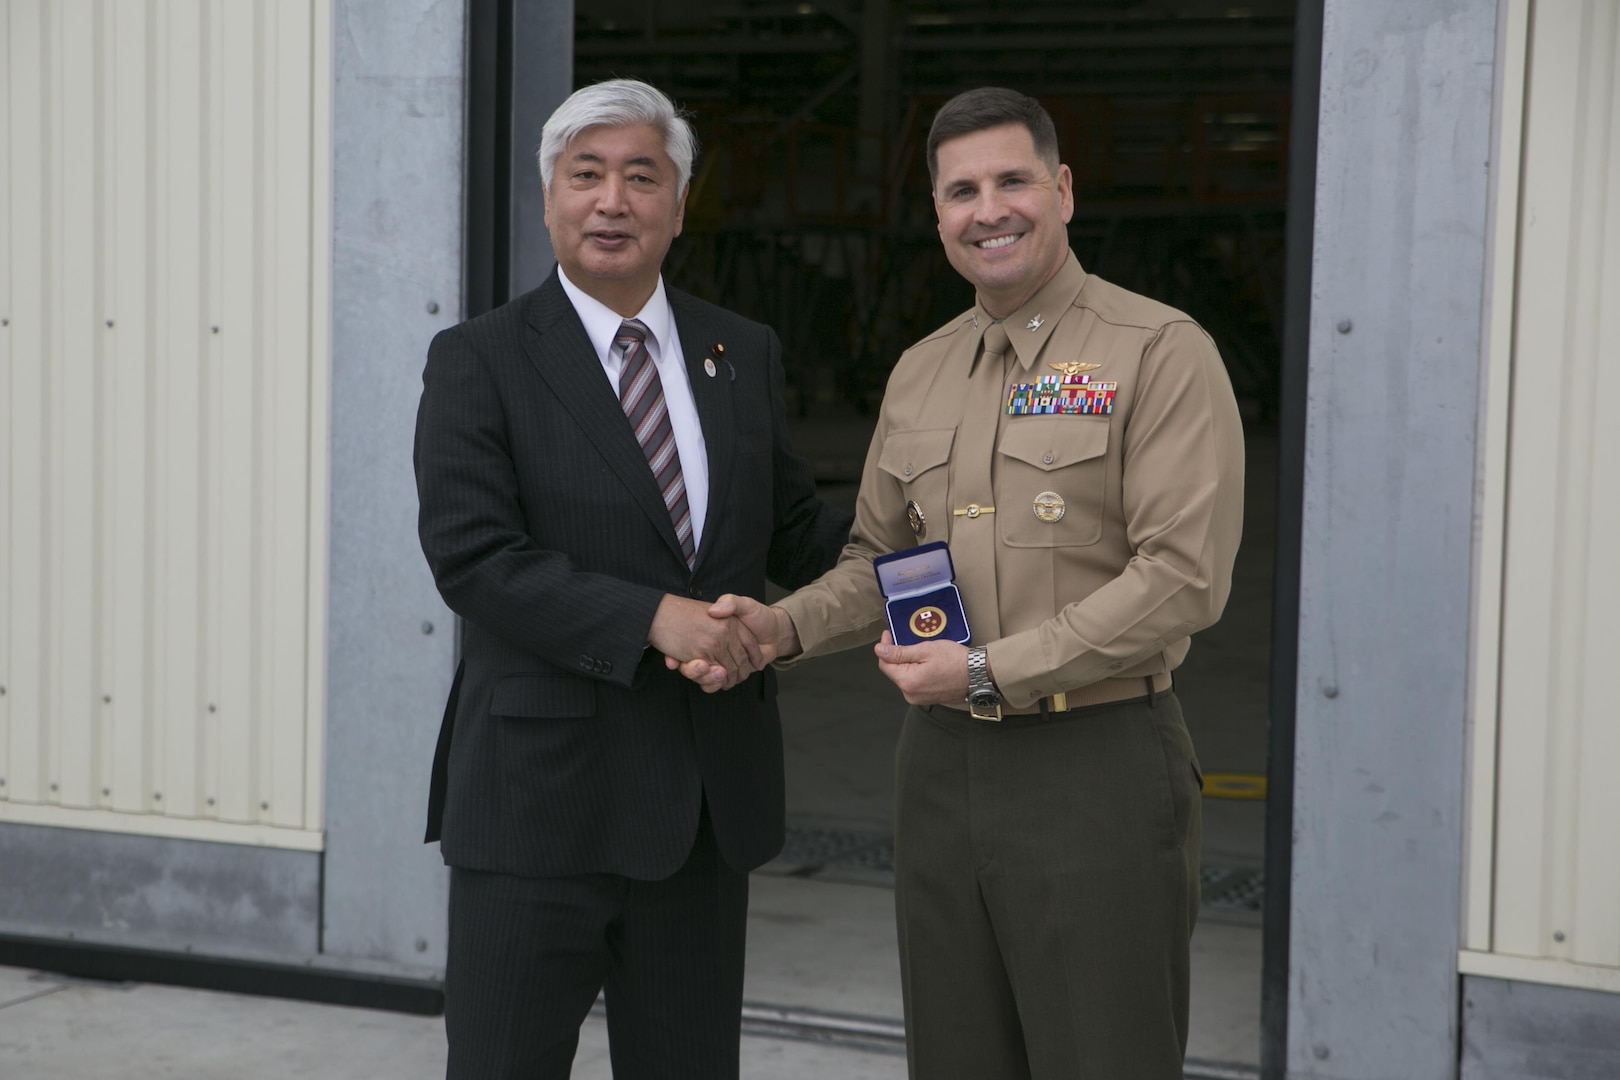 Gen Nakatani, Japanese Defense Minister, presents Col. Robert V. Boucher, commanding officer of Marine Corps Air Station Iwakuni, Japan, with a gift after Nakatani's tour of Marine Aerial Refueler Transport Squadron (VMGR) 152 facilities during his visit to the air station, Dec. 2, 2015. As part of the growing U.S. – Japan relationship, this visit provided Nakatani an opportunity to connect with station officials and view pertinent installation facilities that aid in the Marine Corps’ mission success. (U.S. Marine Corps photo by Cpl. Carlos Cruz Jr./Released)